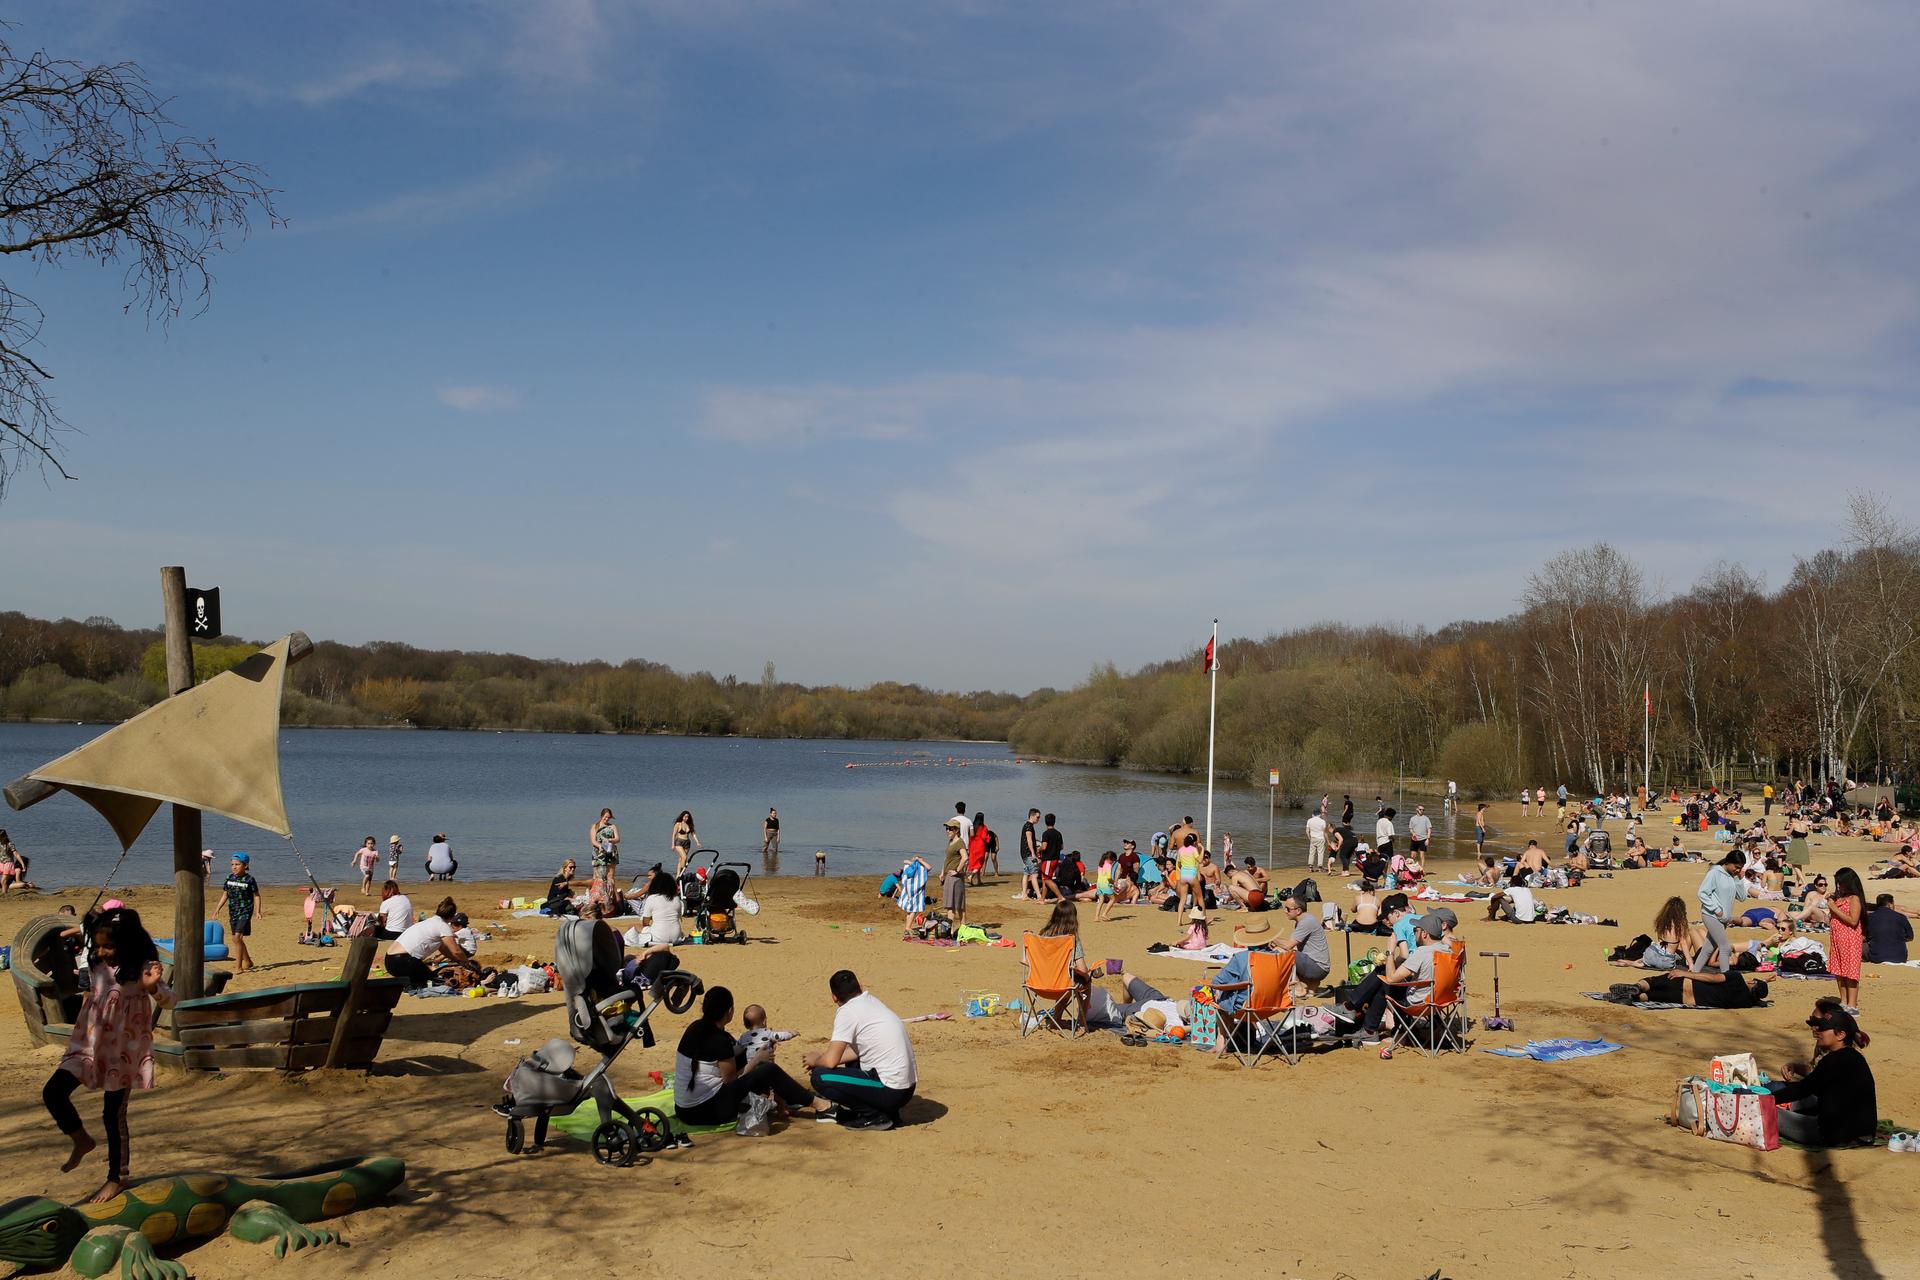 People enjoy the warm weather at Ruislip Lido in London, March 30, 2021. Temperatures in parts of the UK are expected to be significantly warmer this week as families and friends are reunited and outdoor sporting activities are allowed to resume in Englan